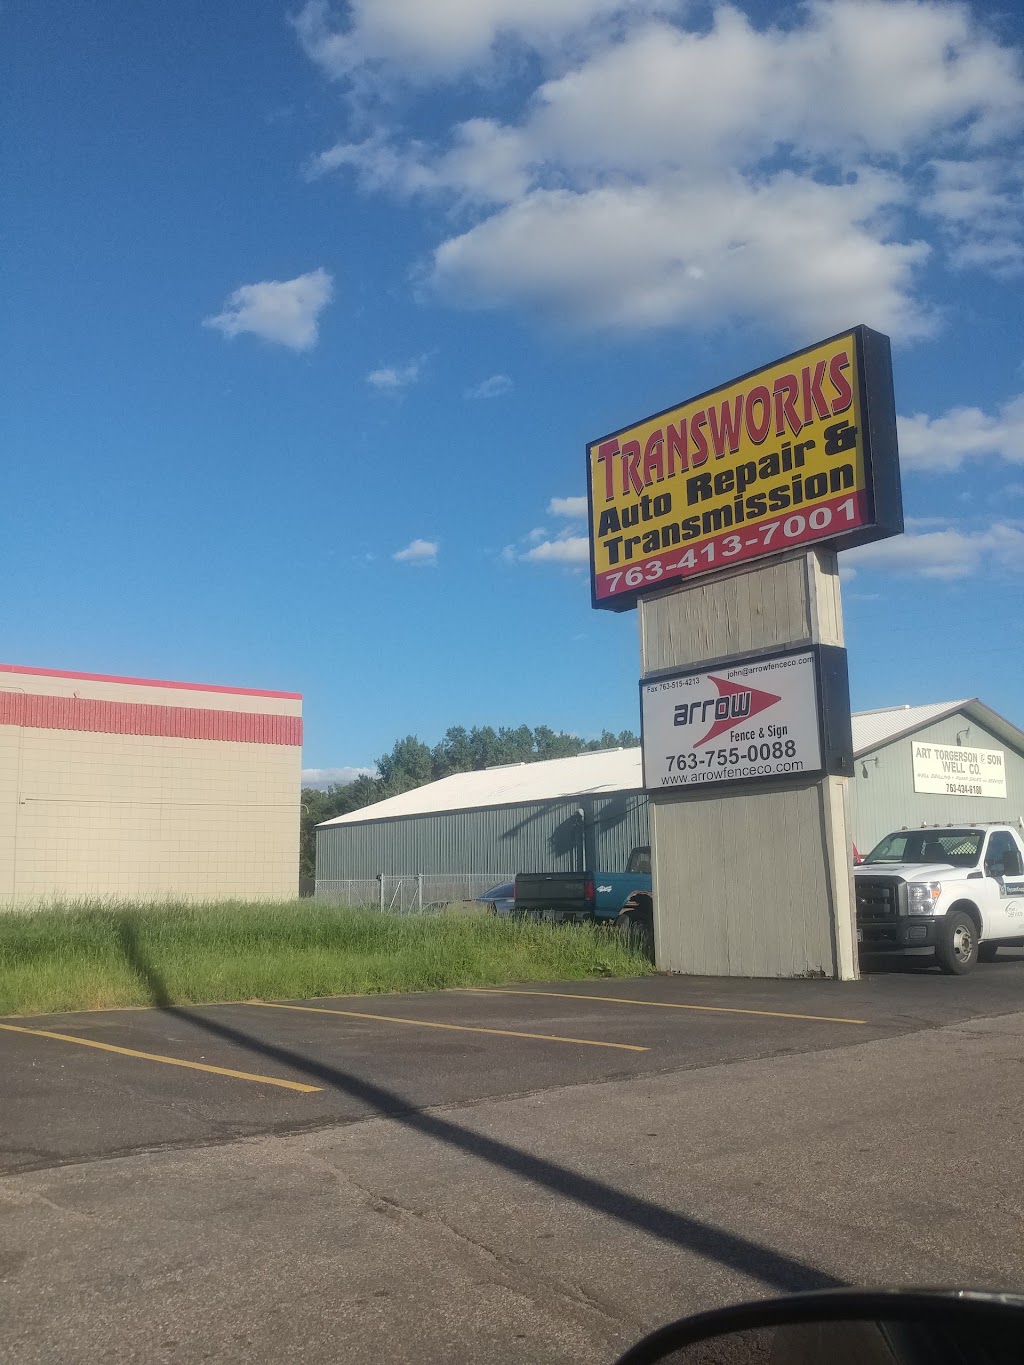 Transworks Transmission & Auto Repair | 18607 MN-65, East Bethel, MN 55011, USA | Phone: (763) 413-7001